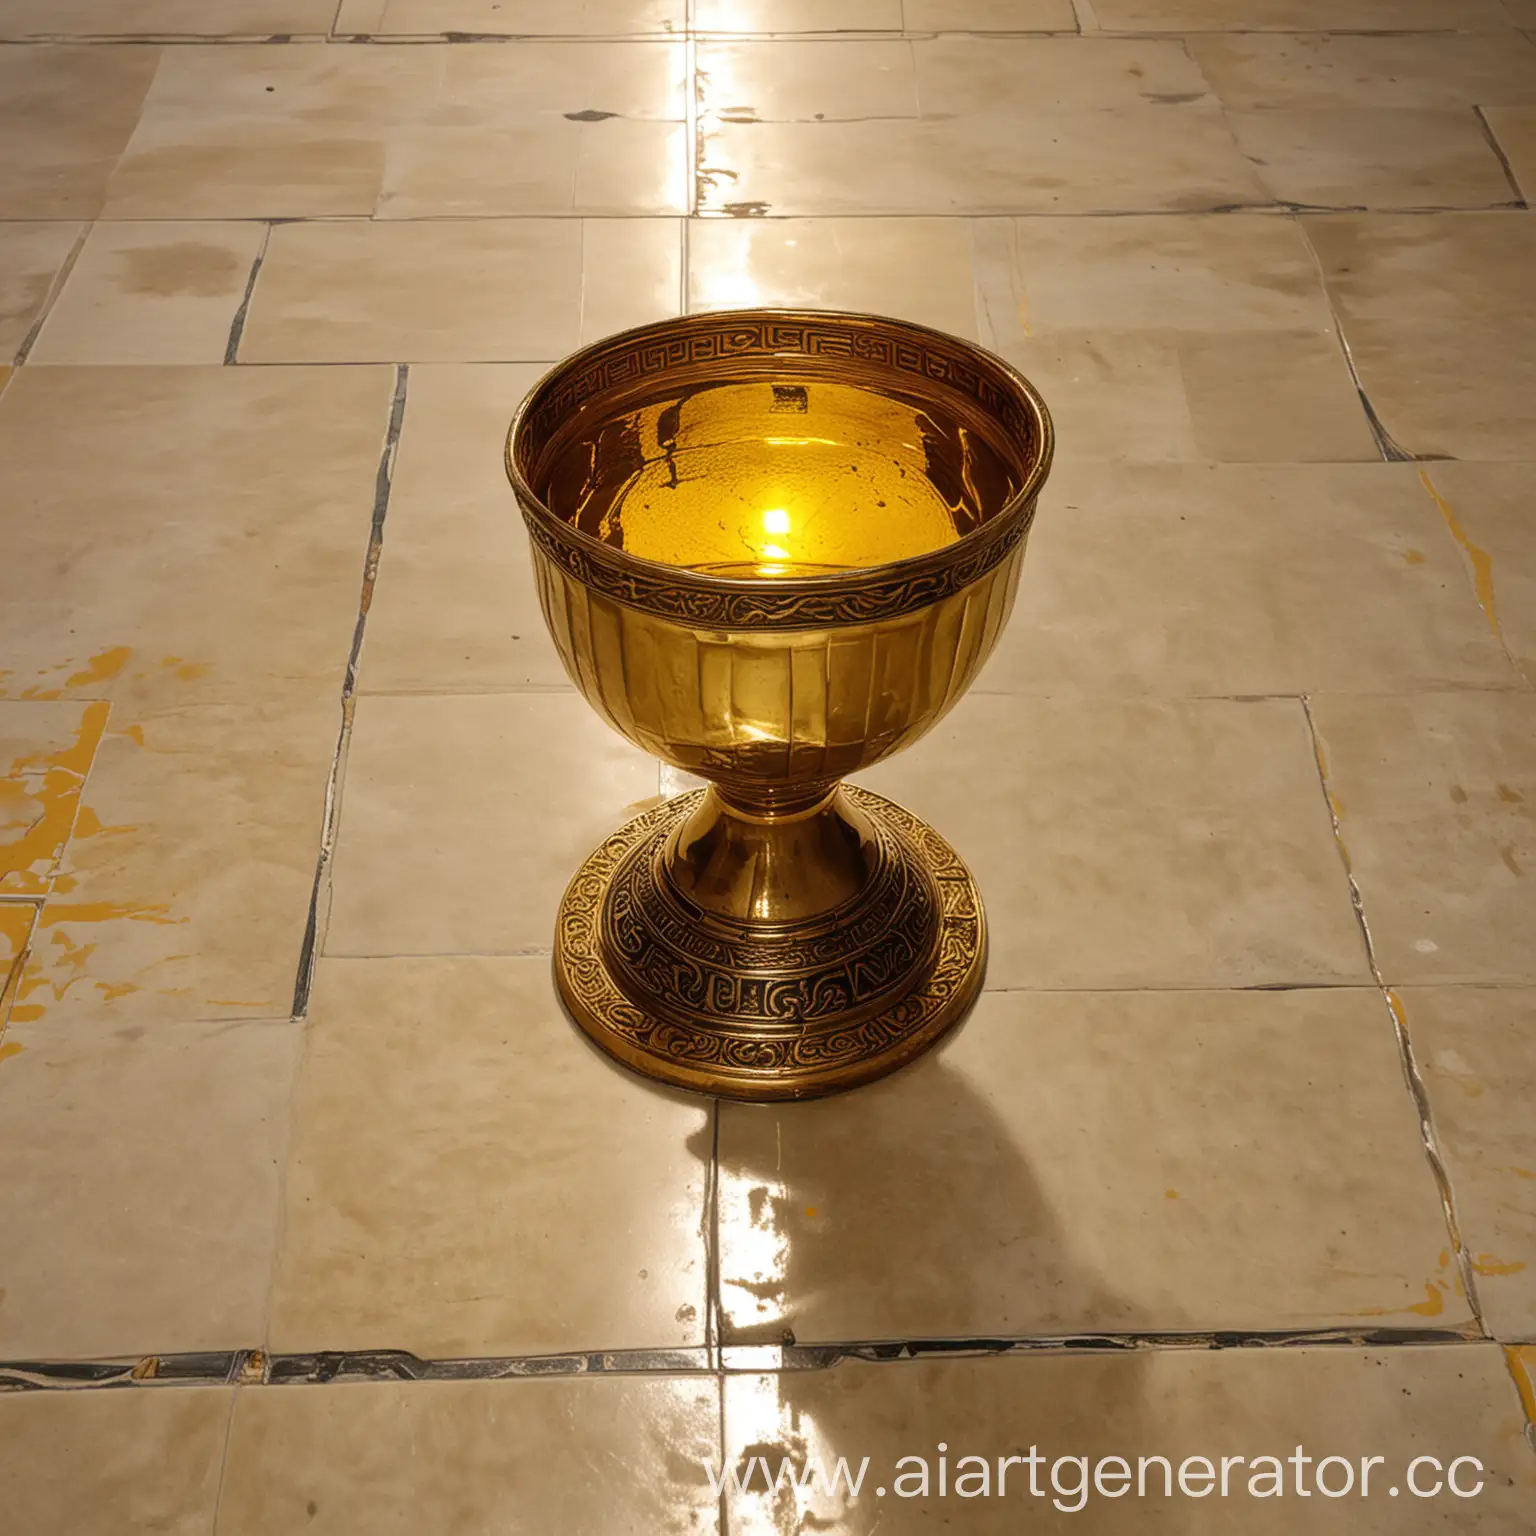  A large high golden grail with yellow water inside on a tiled floor